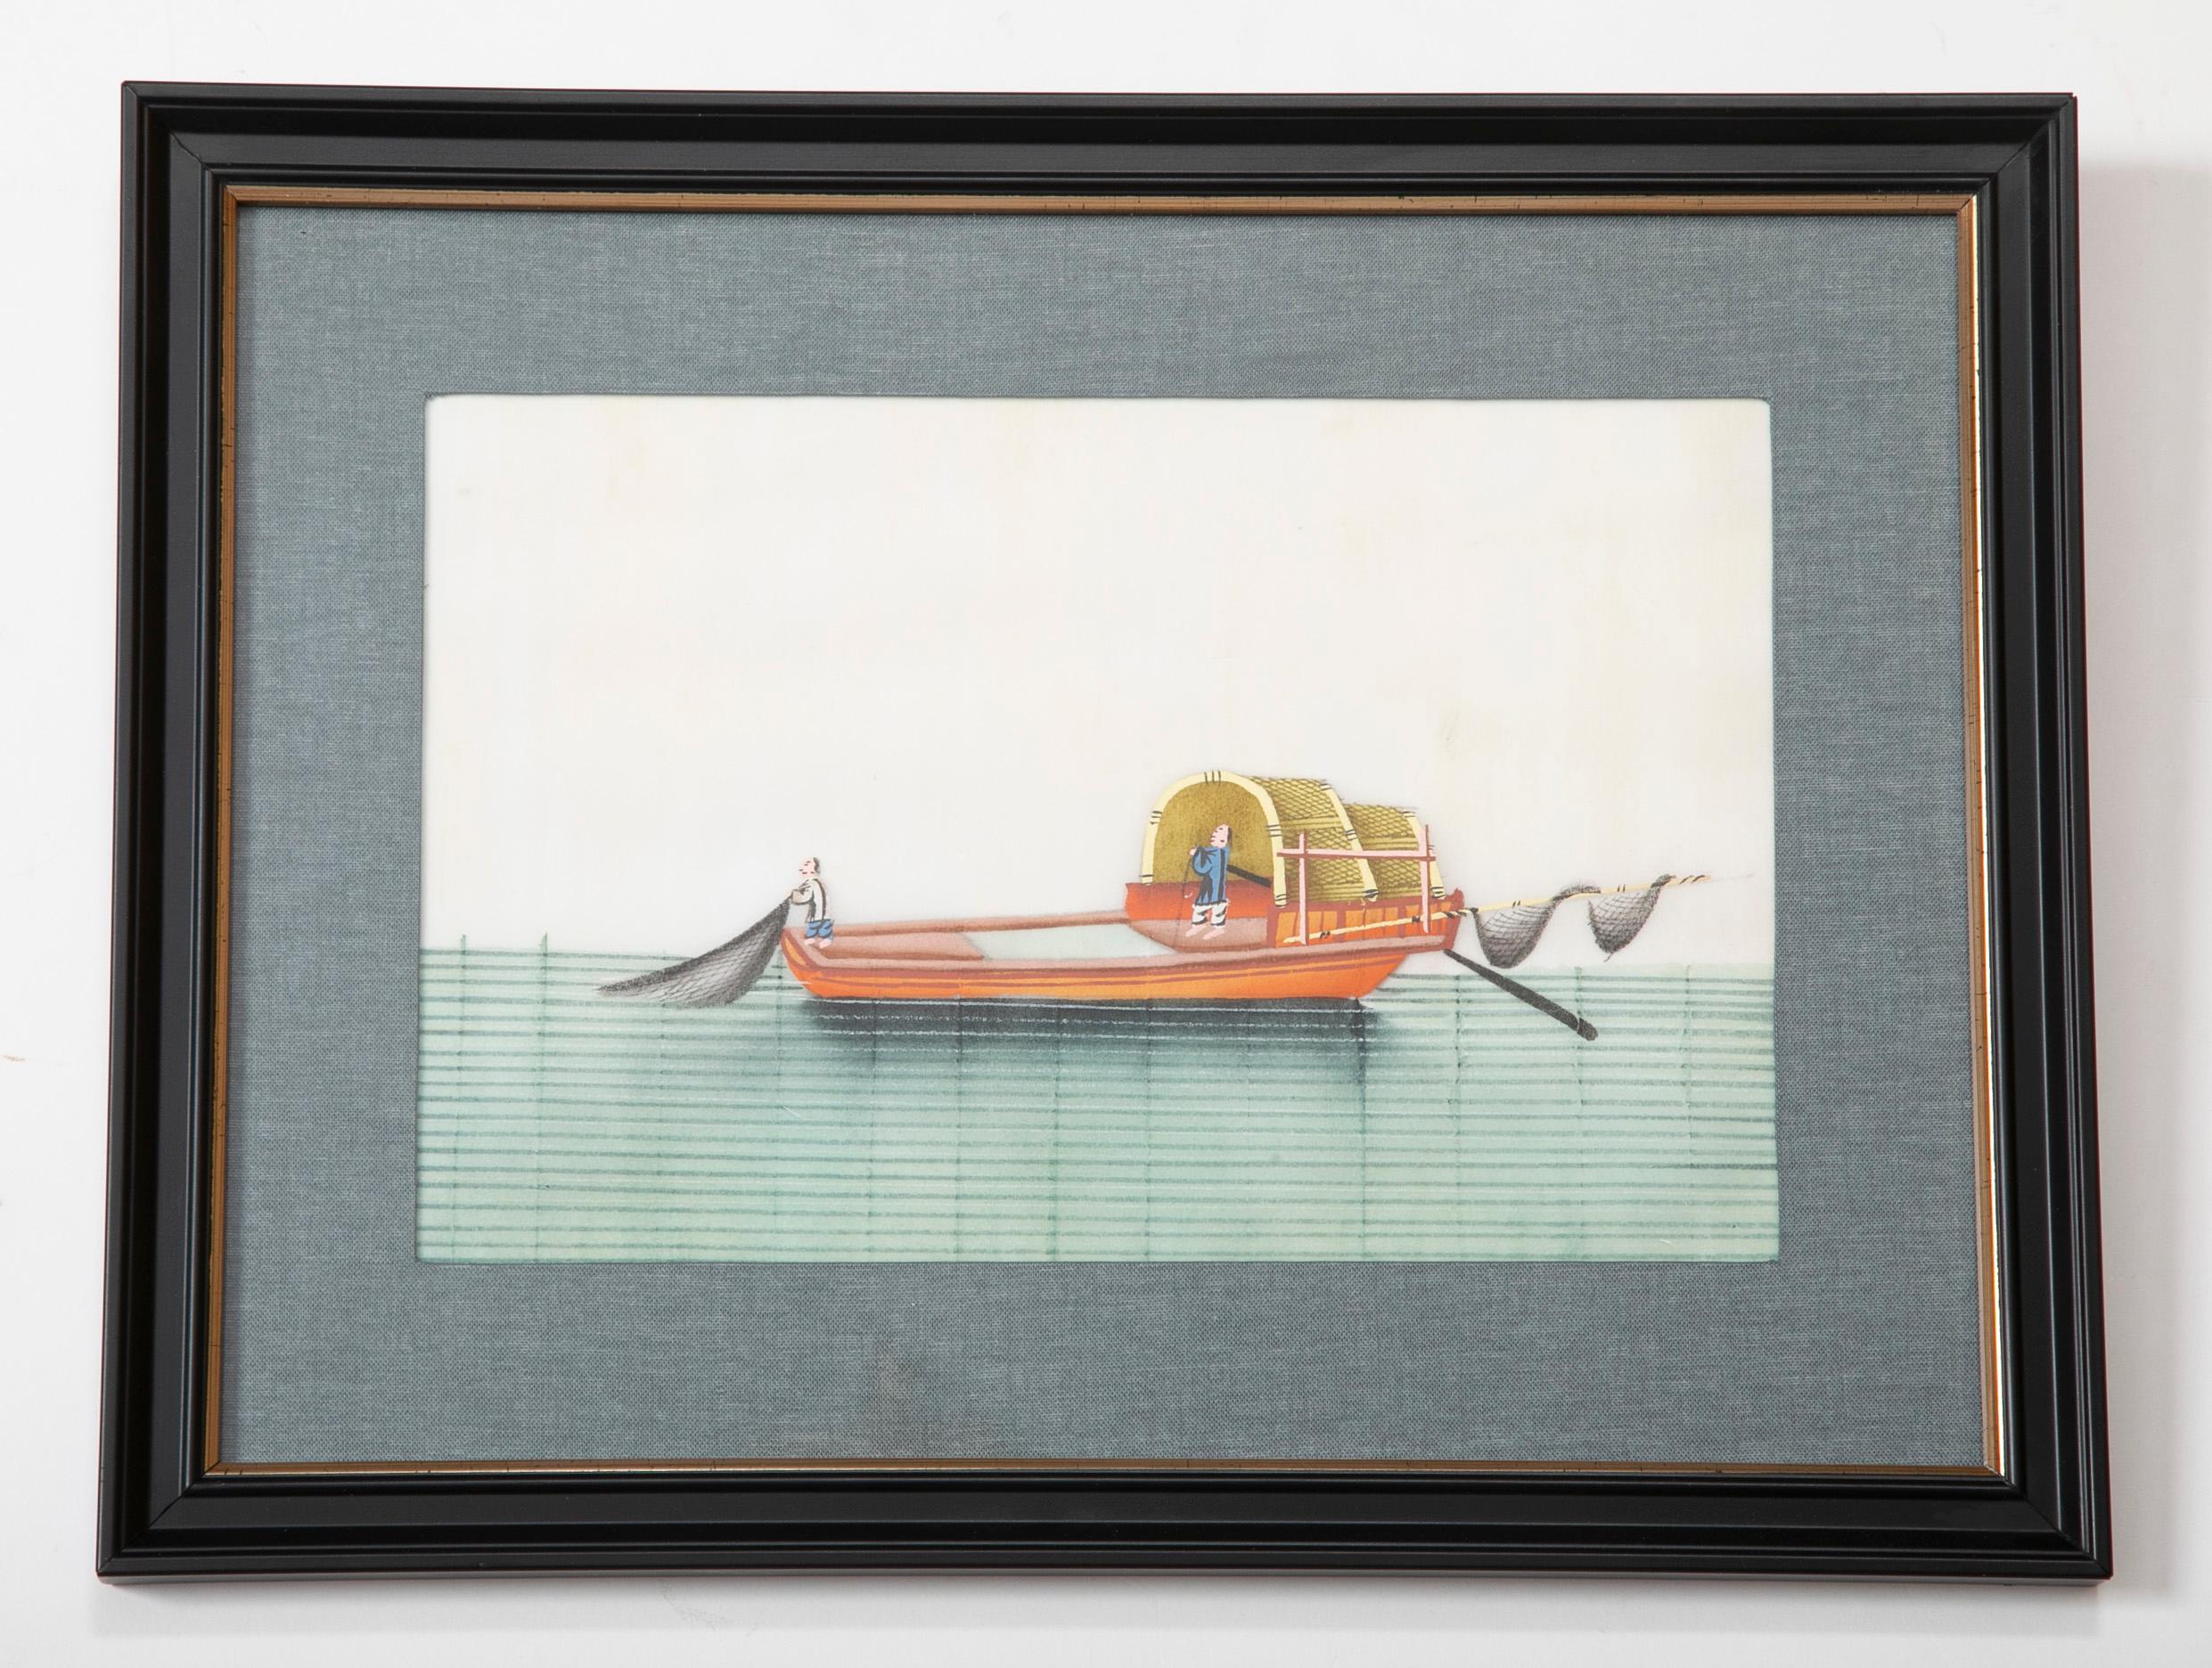 A charming and rare set of six Chinese gouaches of sailing vessels, or junks, painted on pith paper, beautifully framed and matted.
During the 18th and 19th centuries many port cities of China, especially southern Guandong province, were shipping